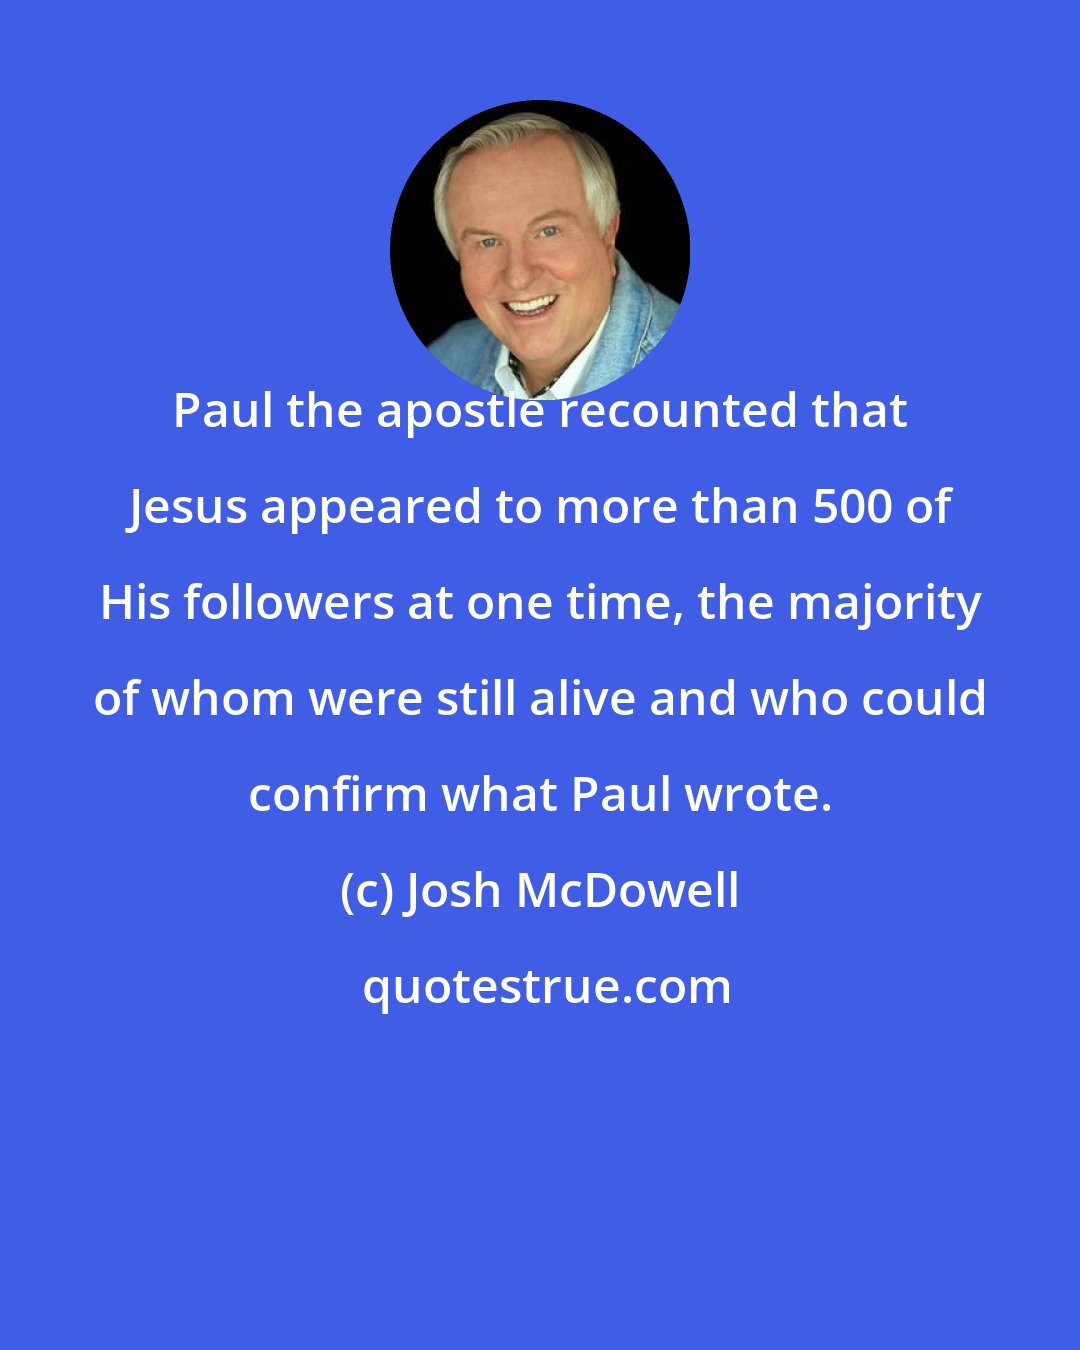 Josh McDowell: Paul the apostle recounted that Jesus appeared to more than 500 of His followers at one time, the majority of whom were still alive and who could confirm what Paul wrote.